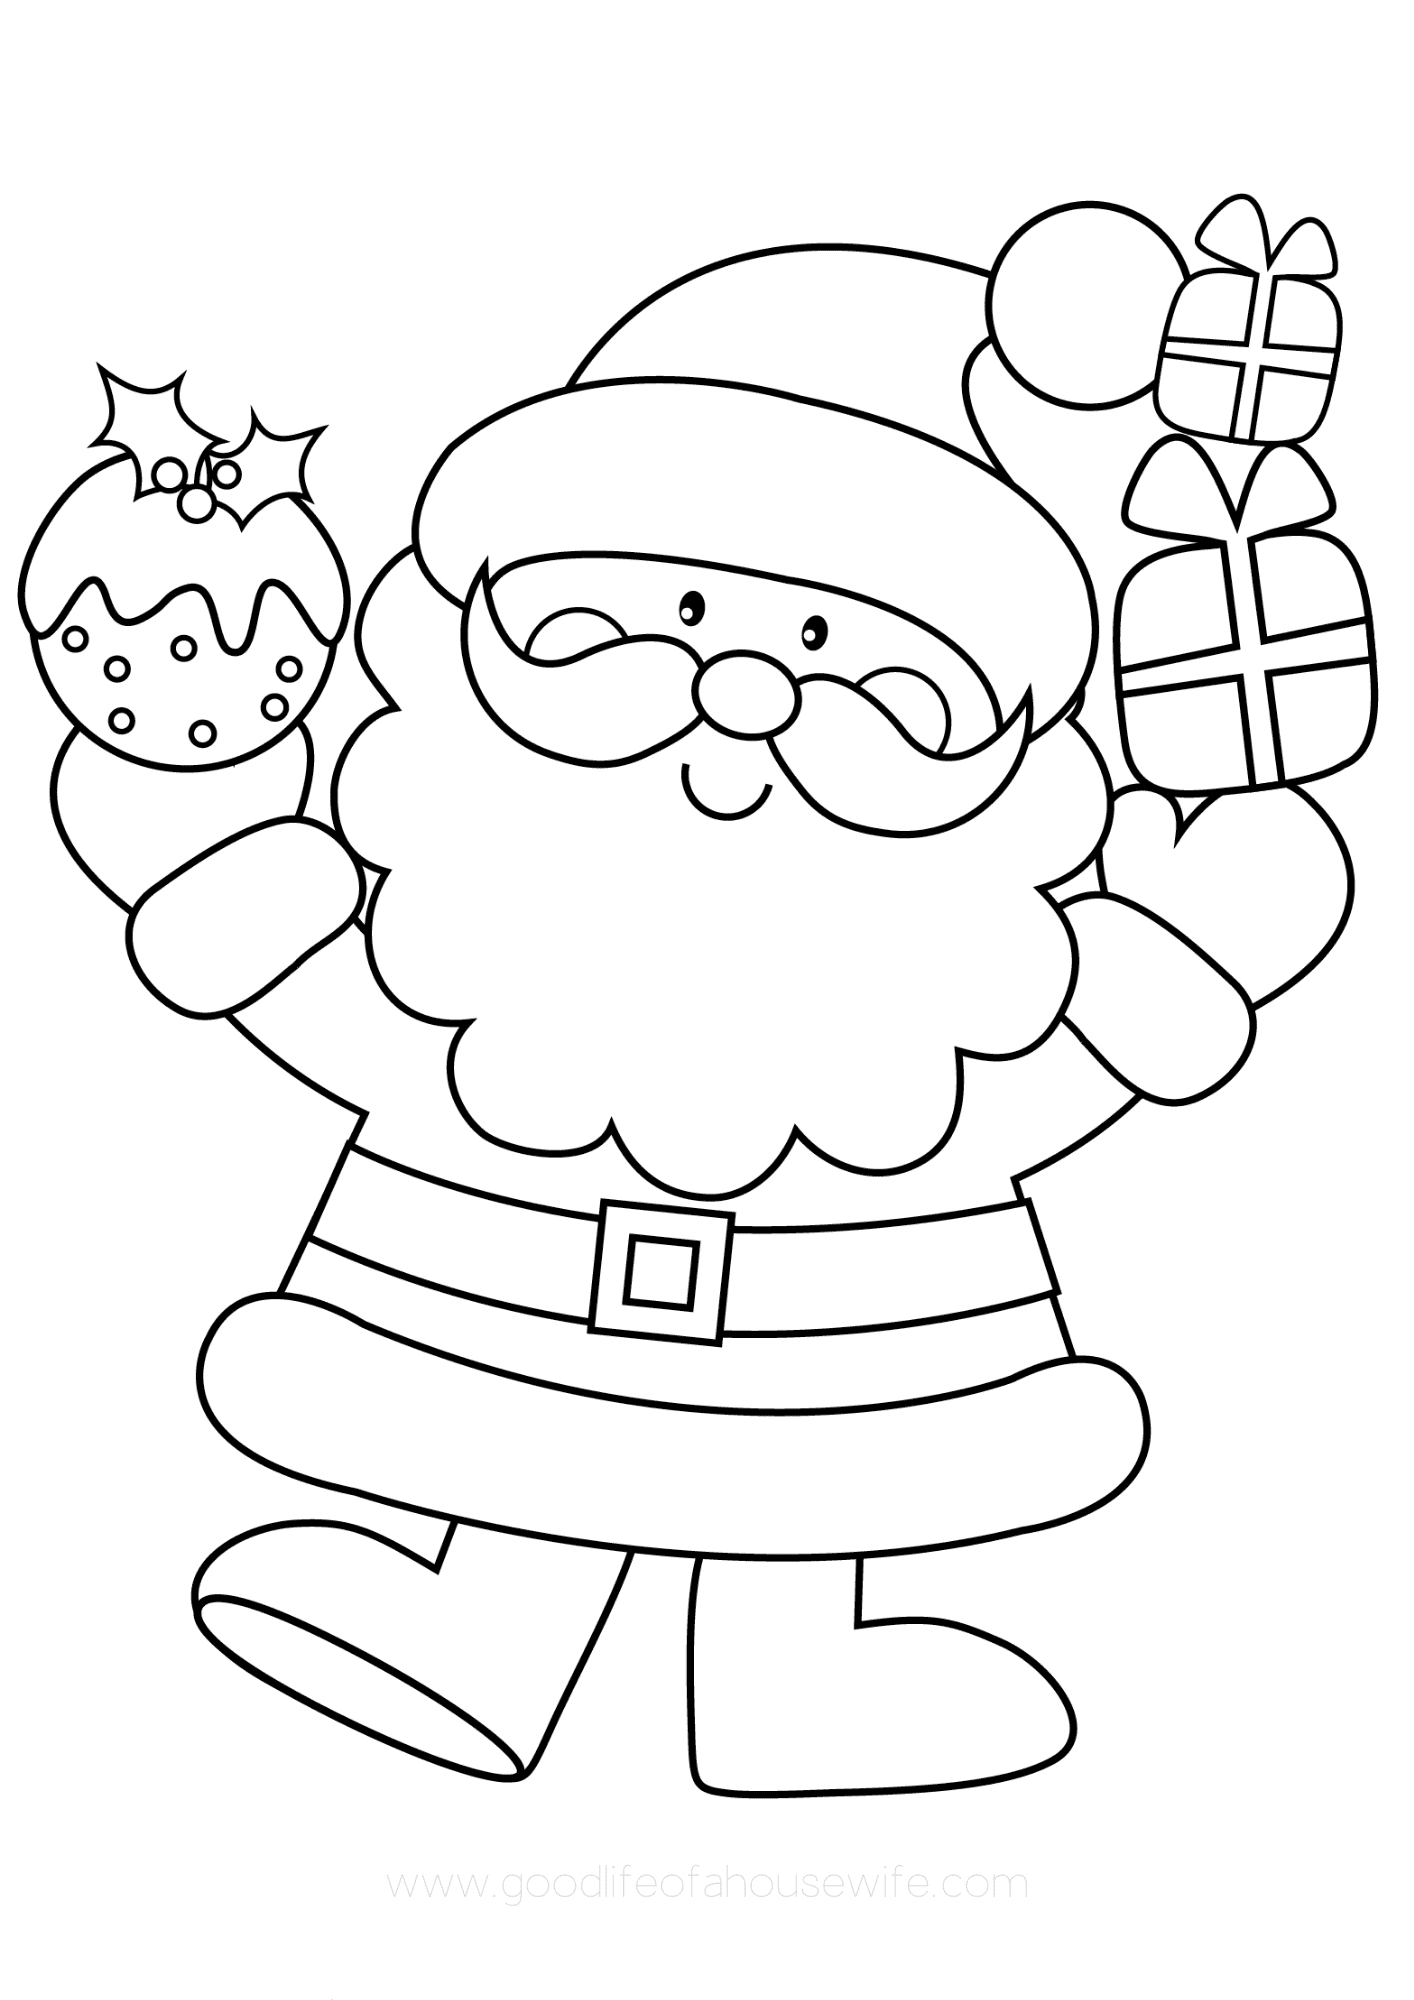 35-free-christmas-coloring-pages-for-kids